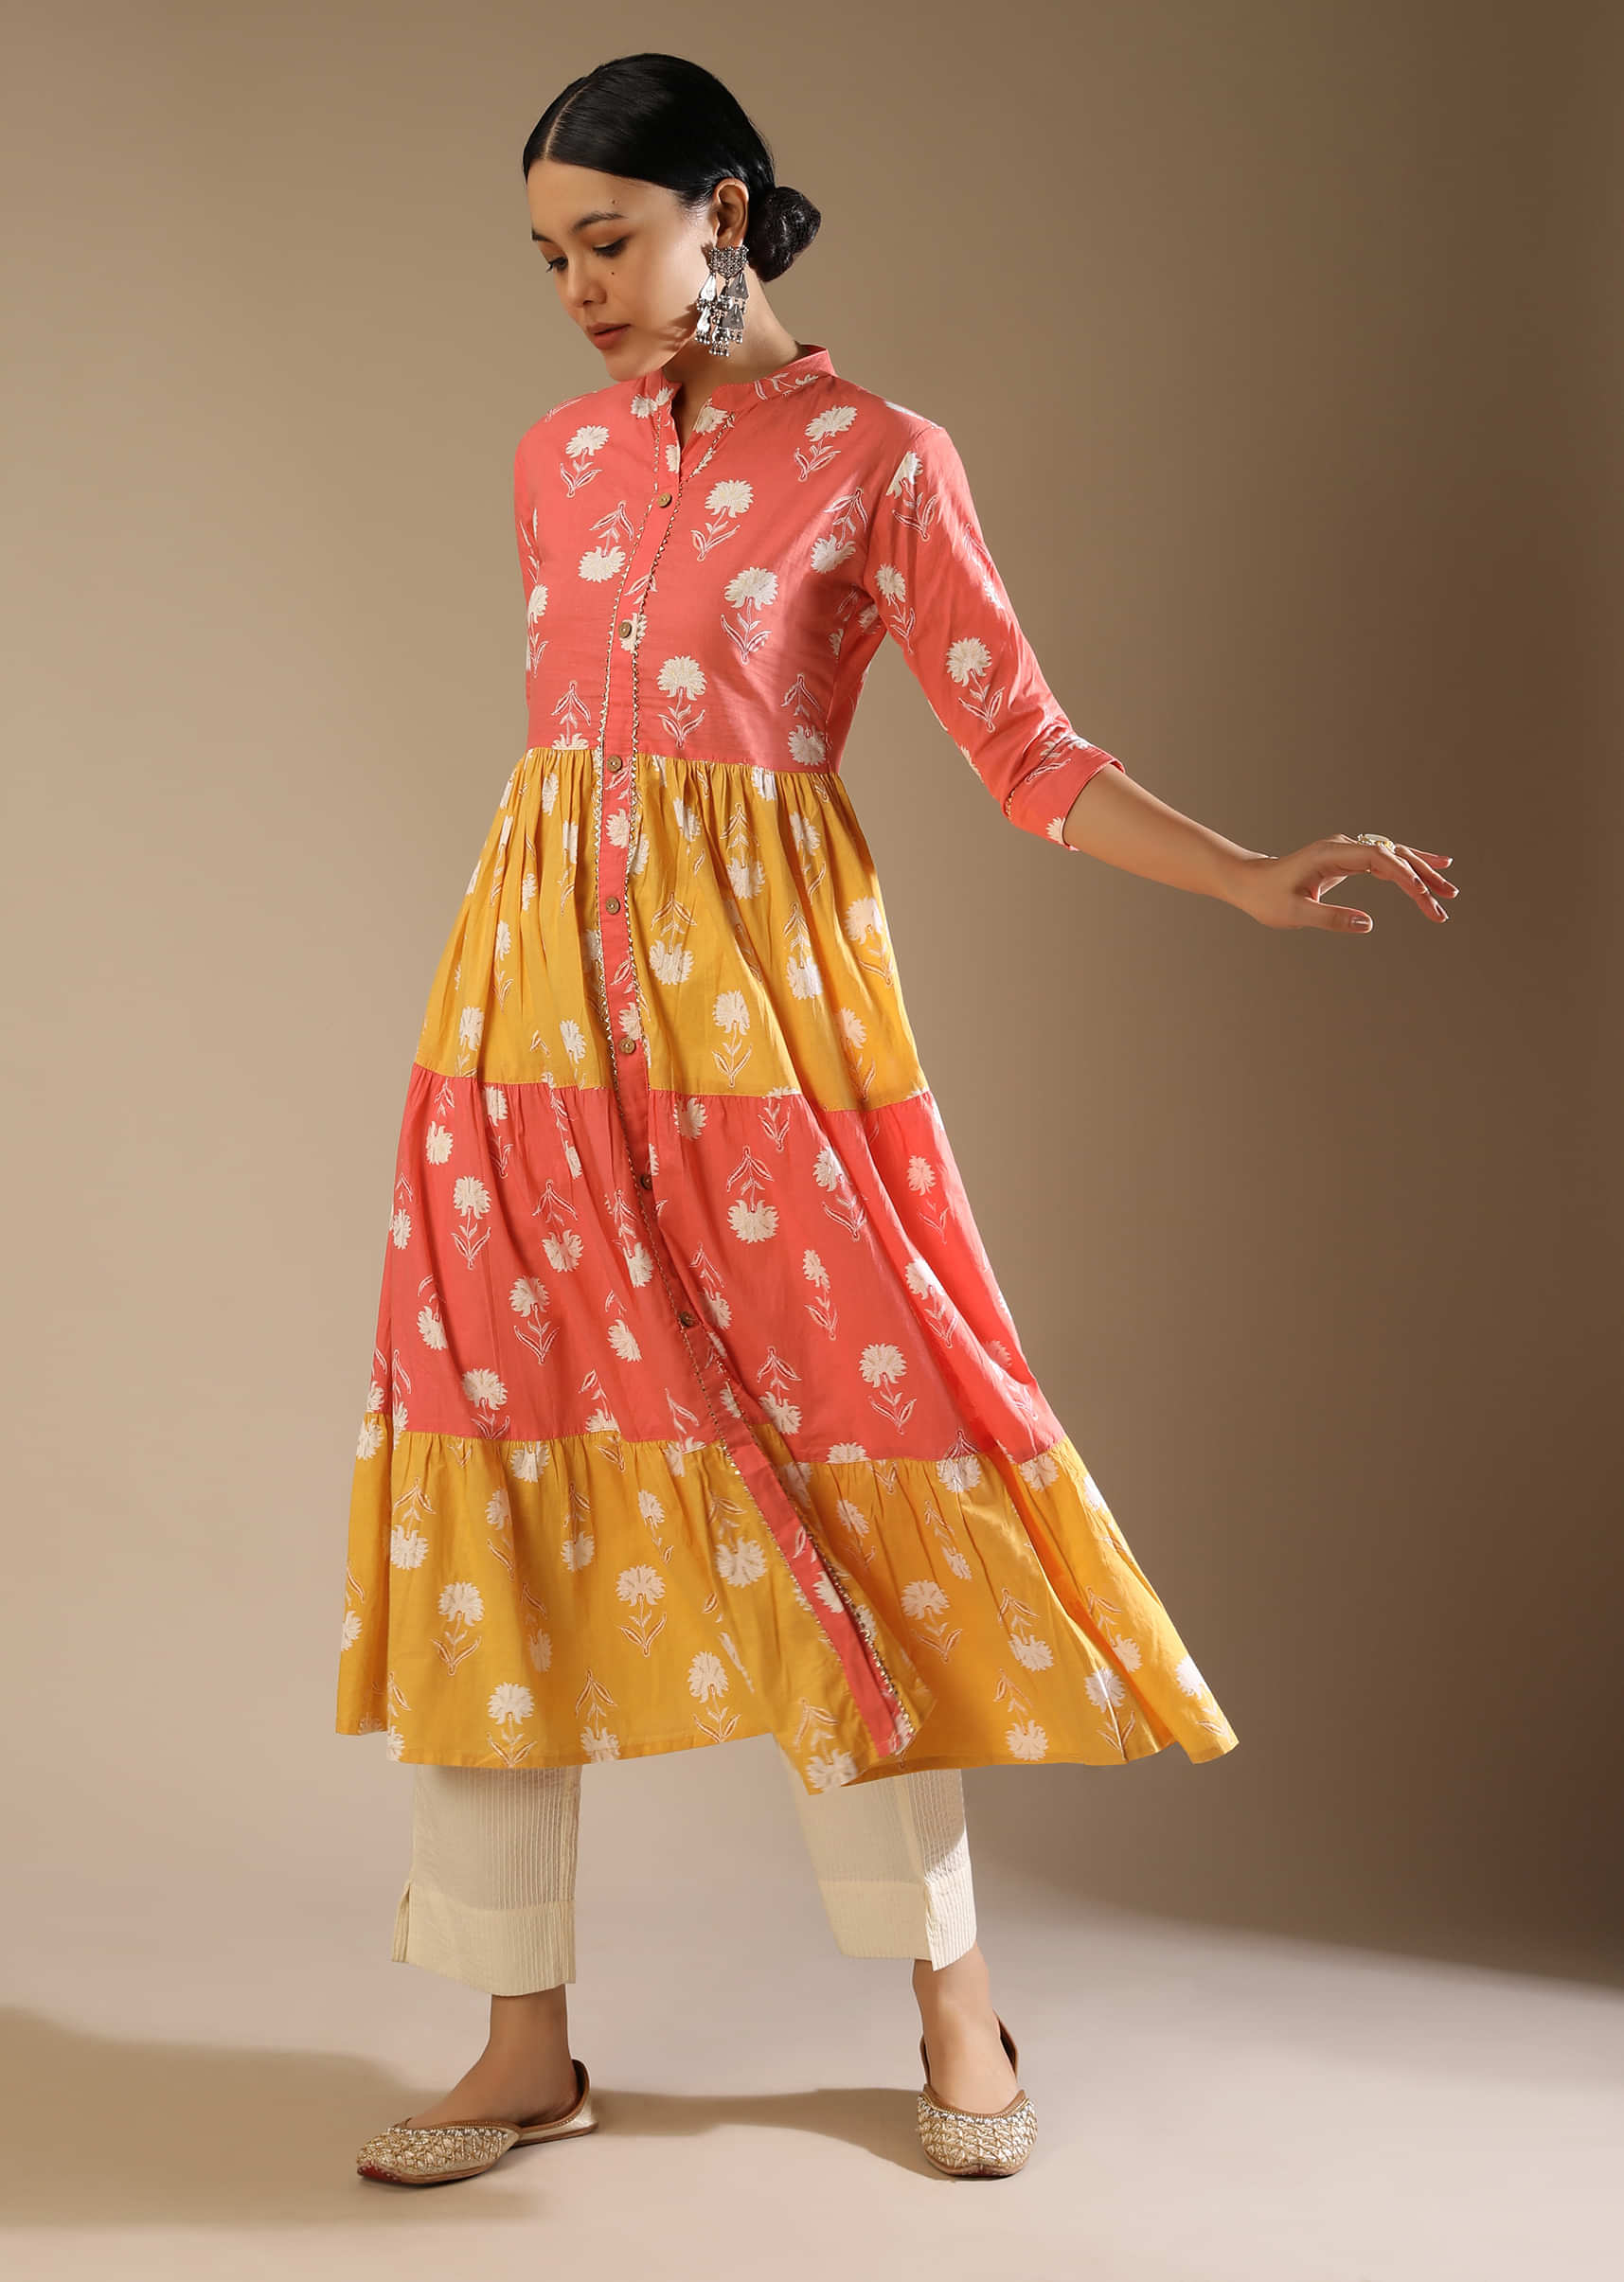 Peach And Yellow Tiered Kurti In Cotton With Floral Printed Buttis And Gotta Lace Work 